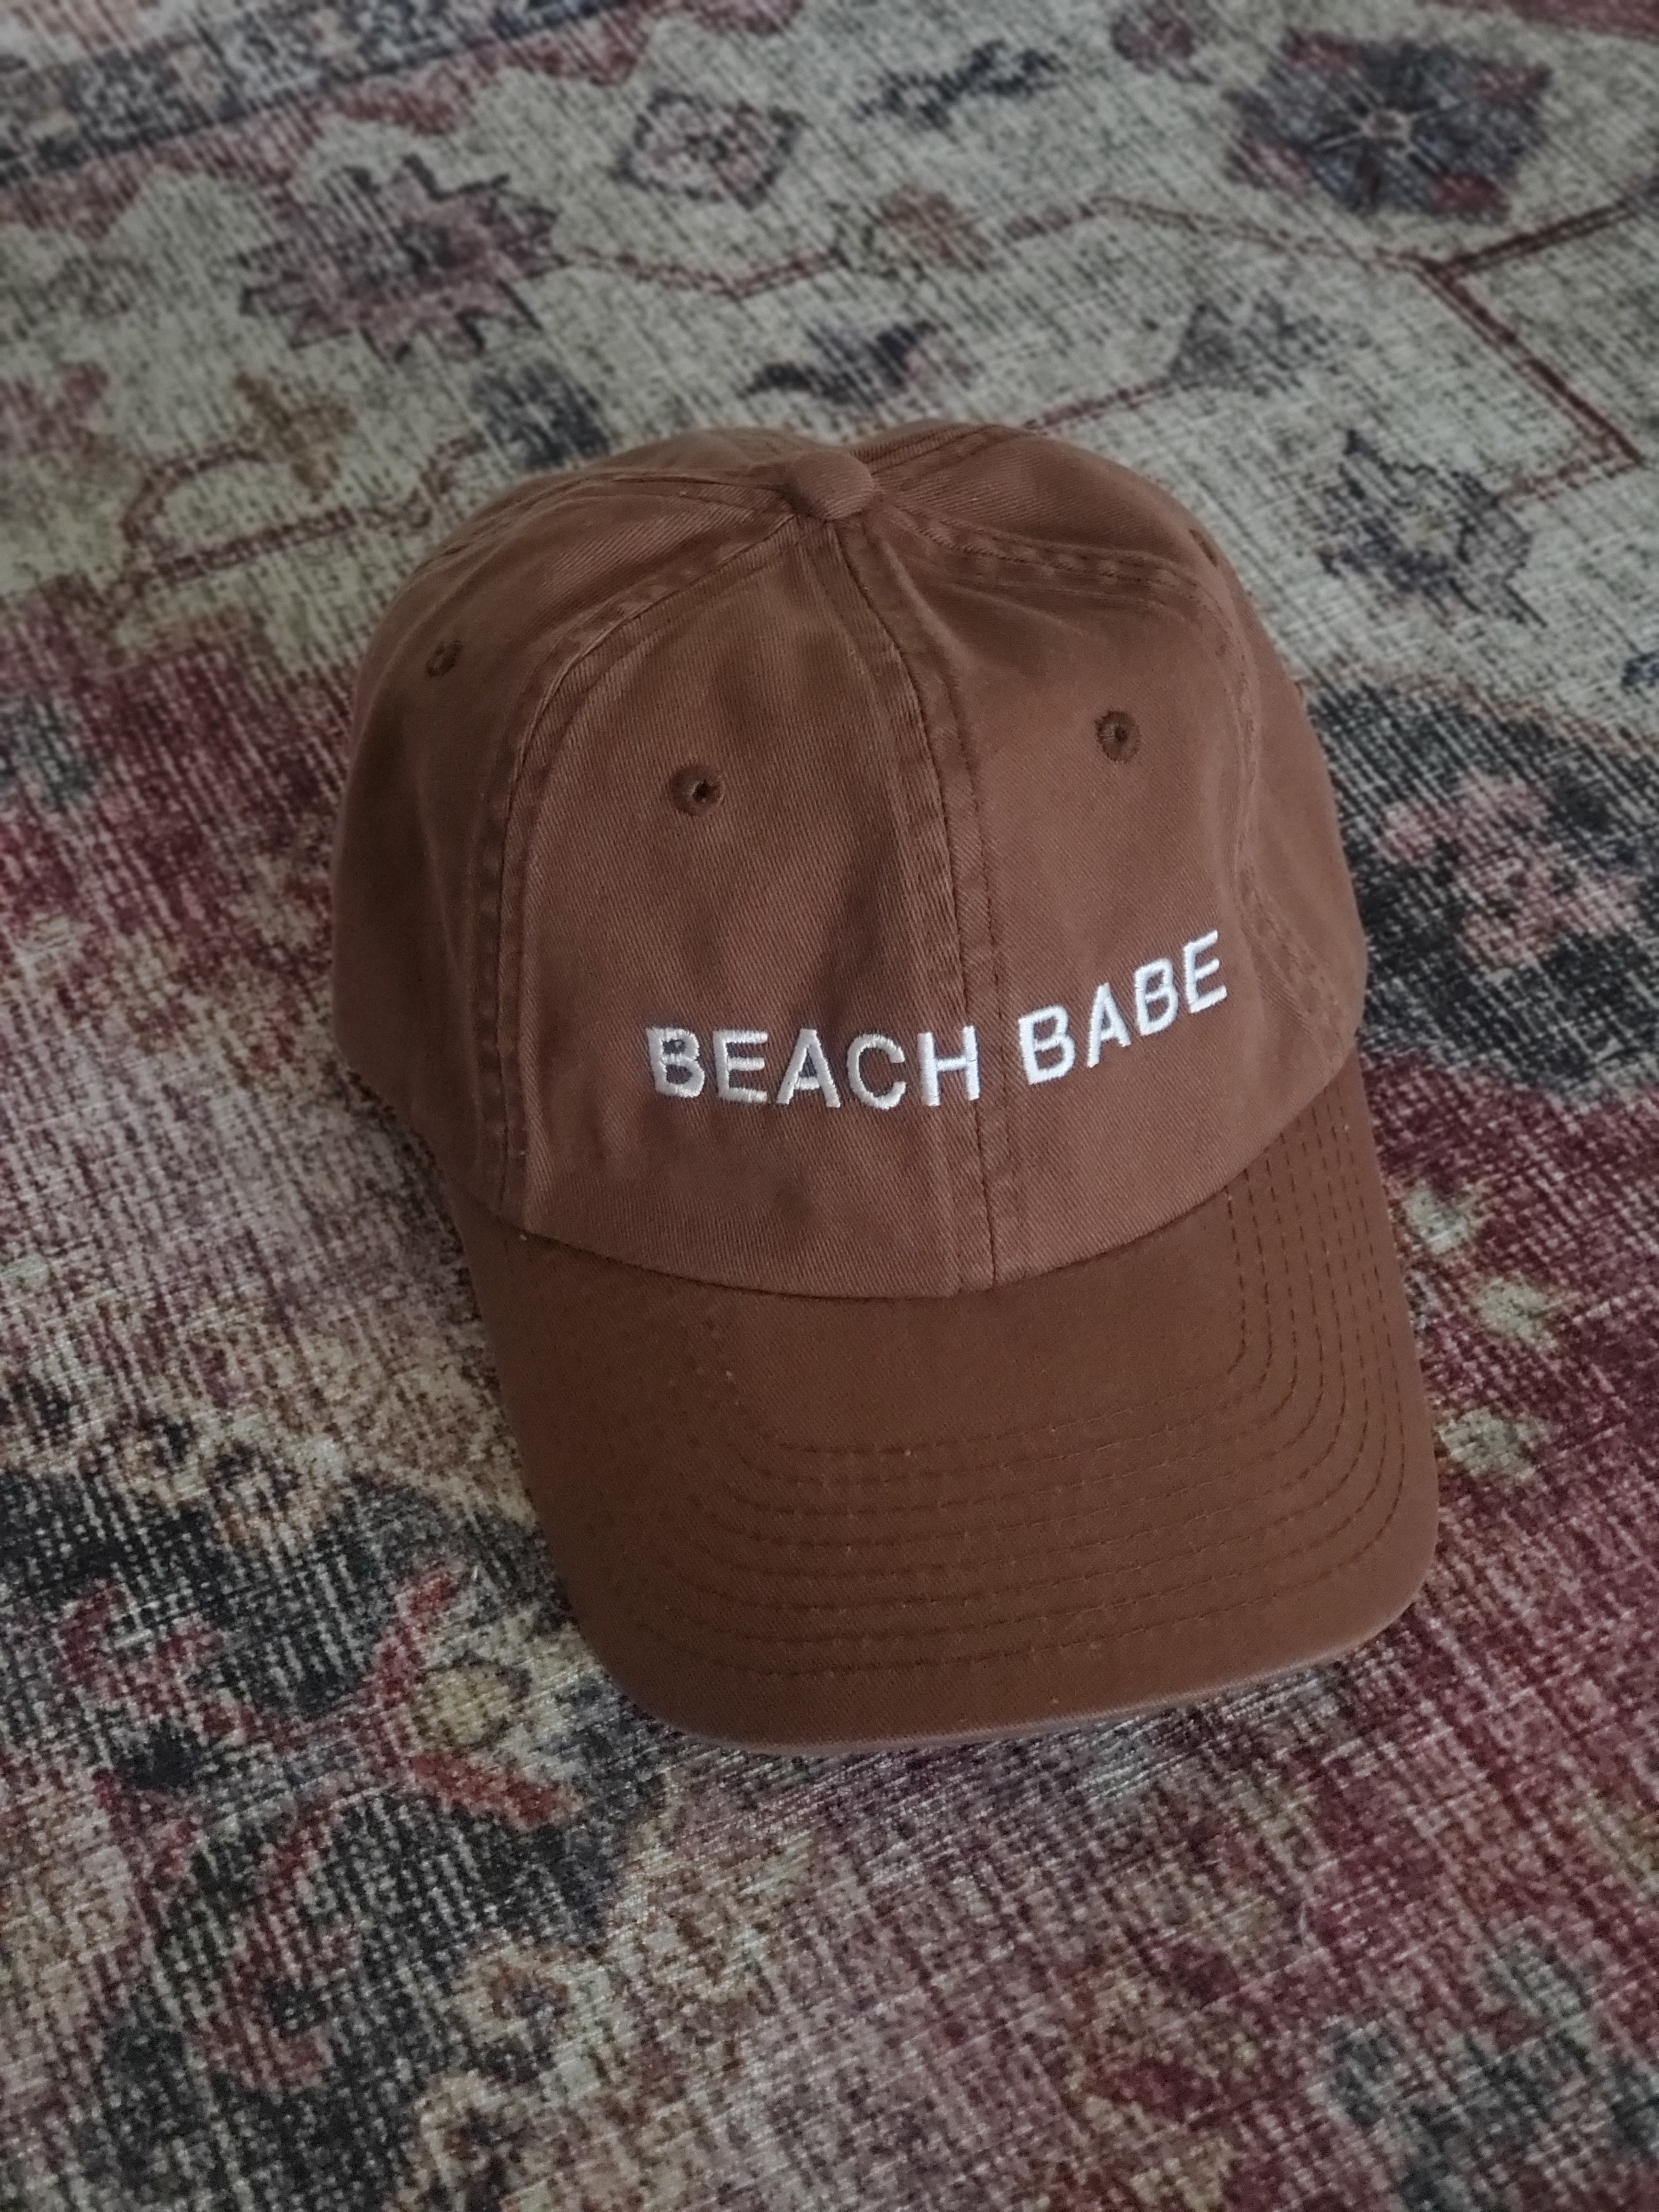 BEACH BABE Embroidered Dad Cap